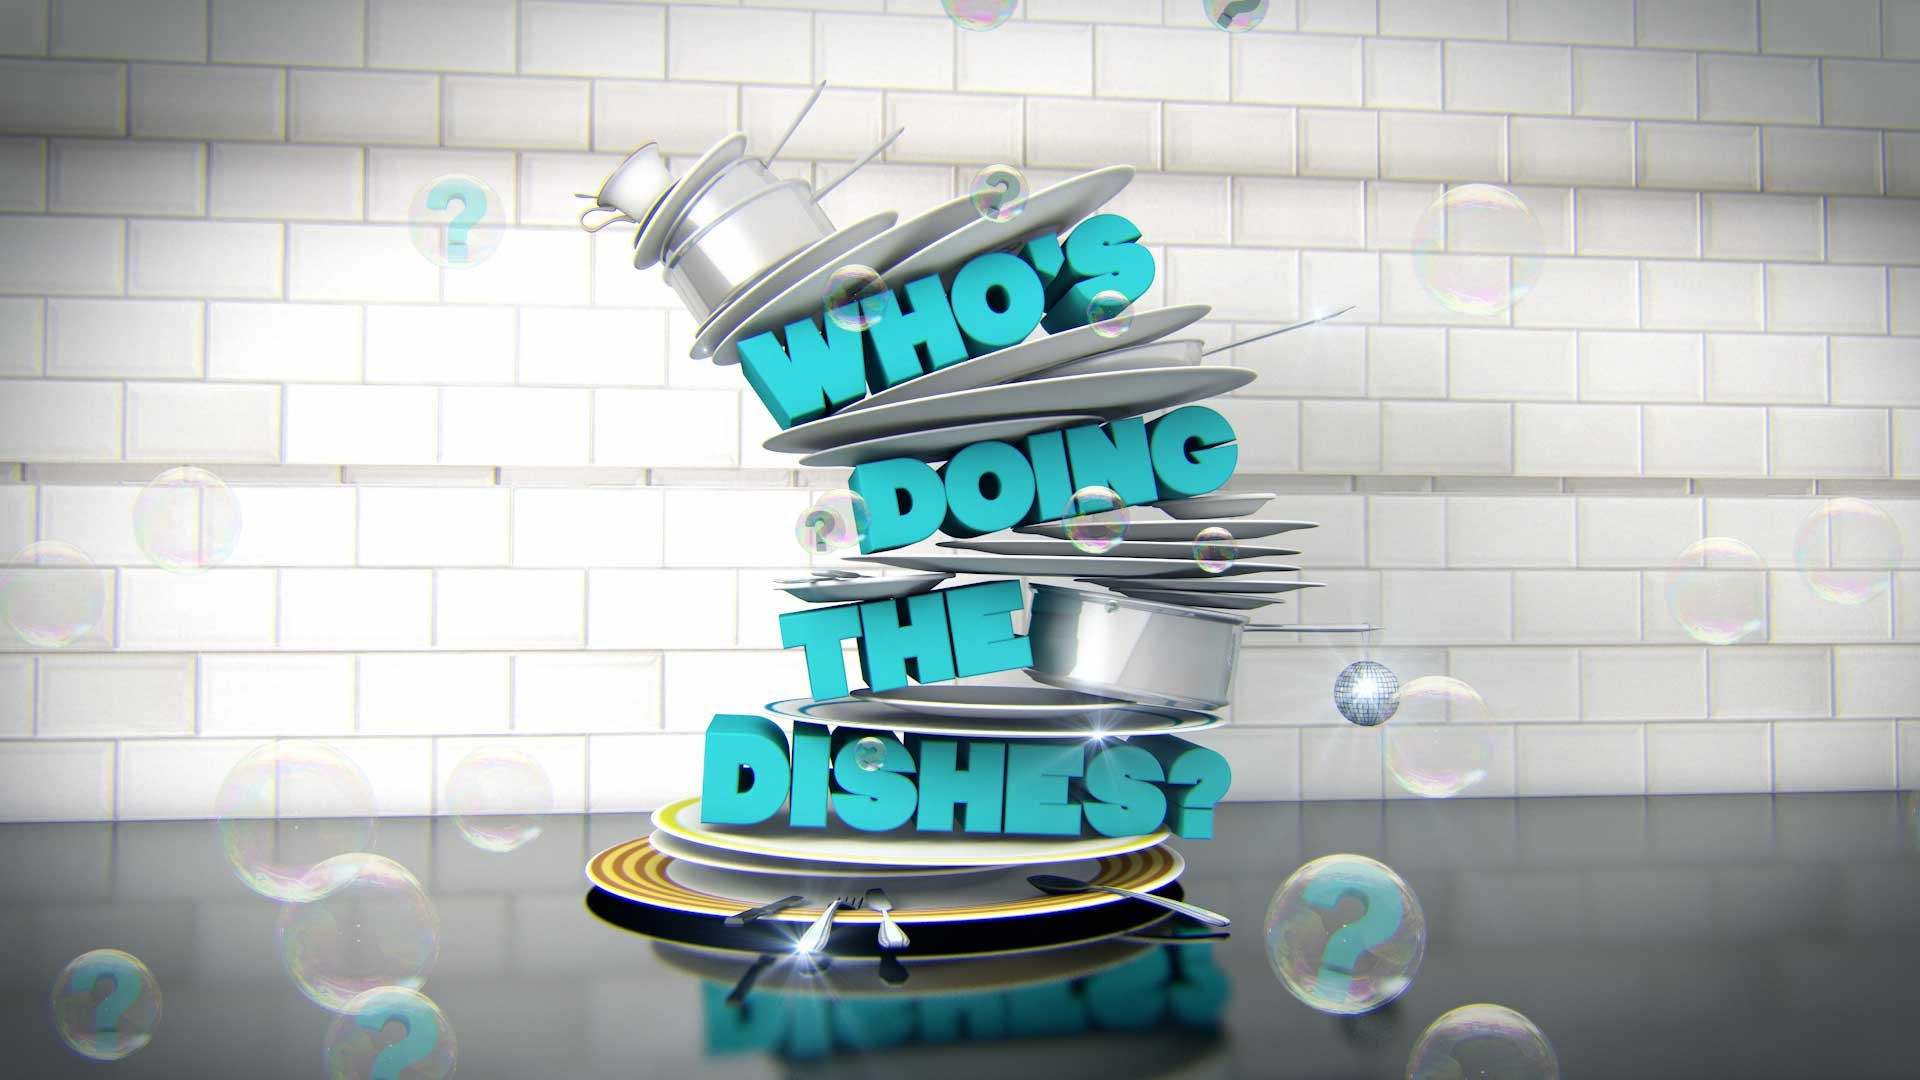 Show Who's Doing the Dishes?